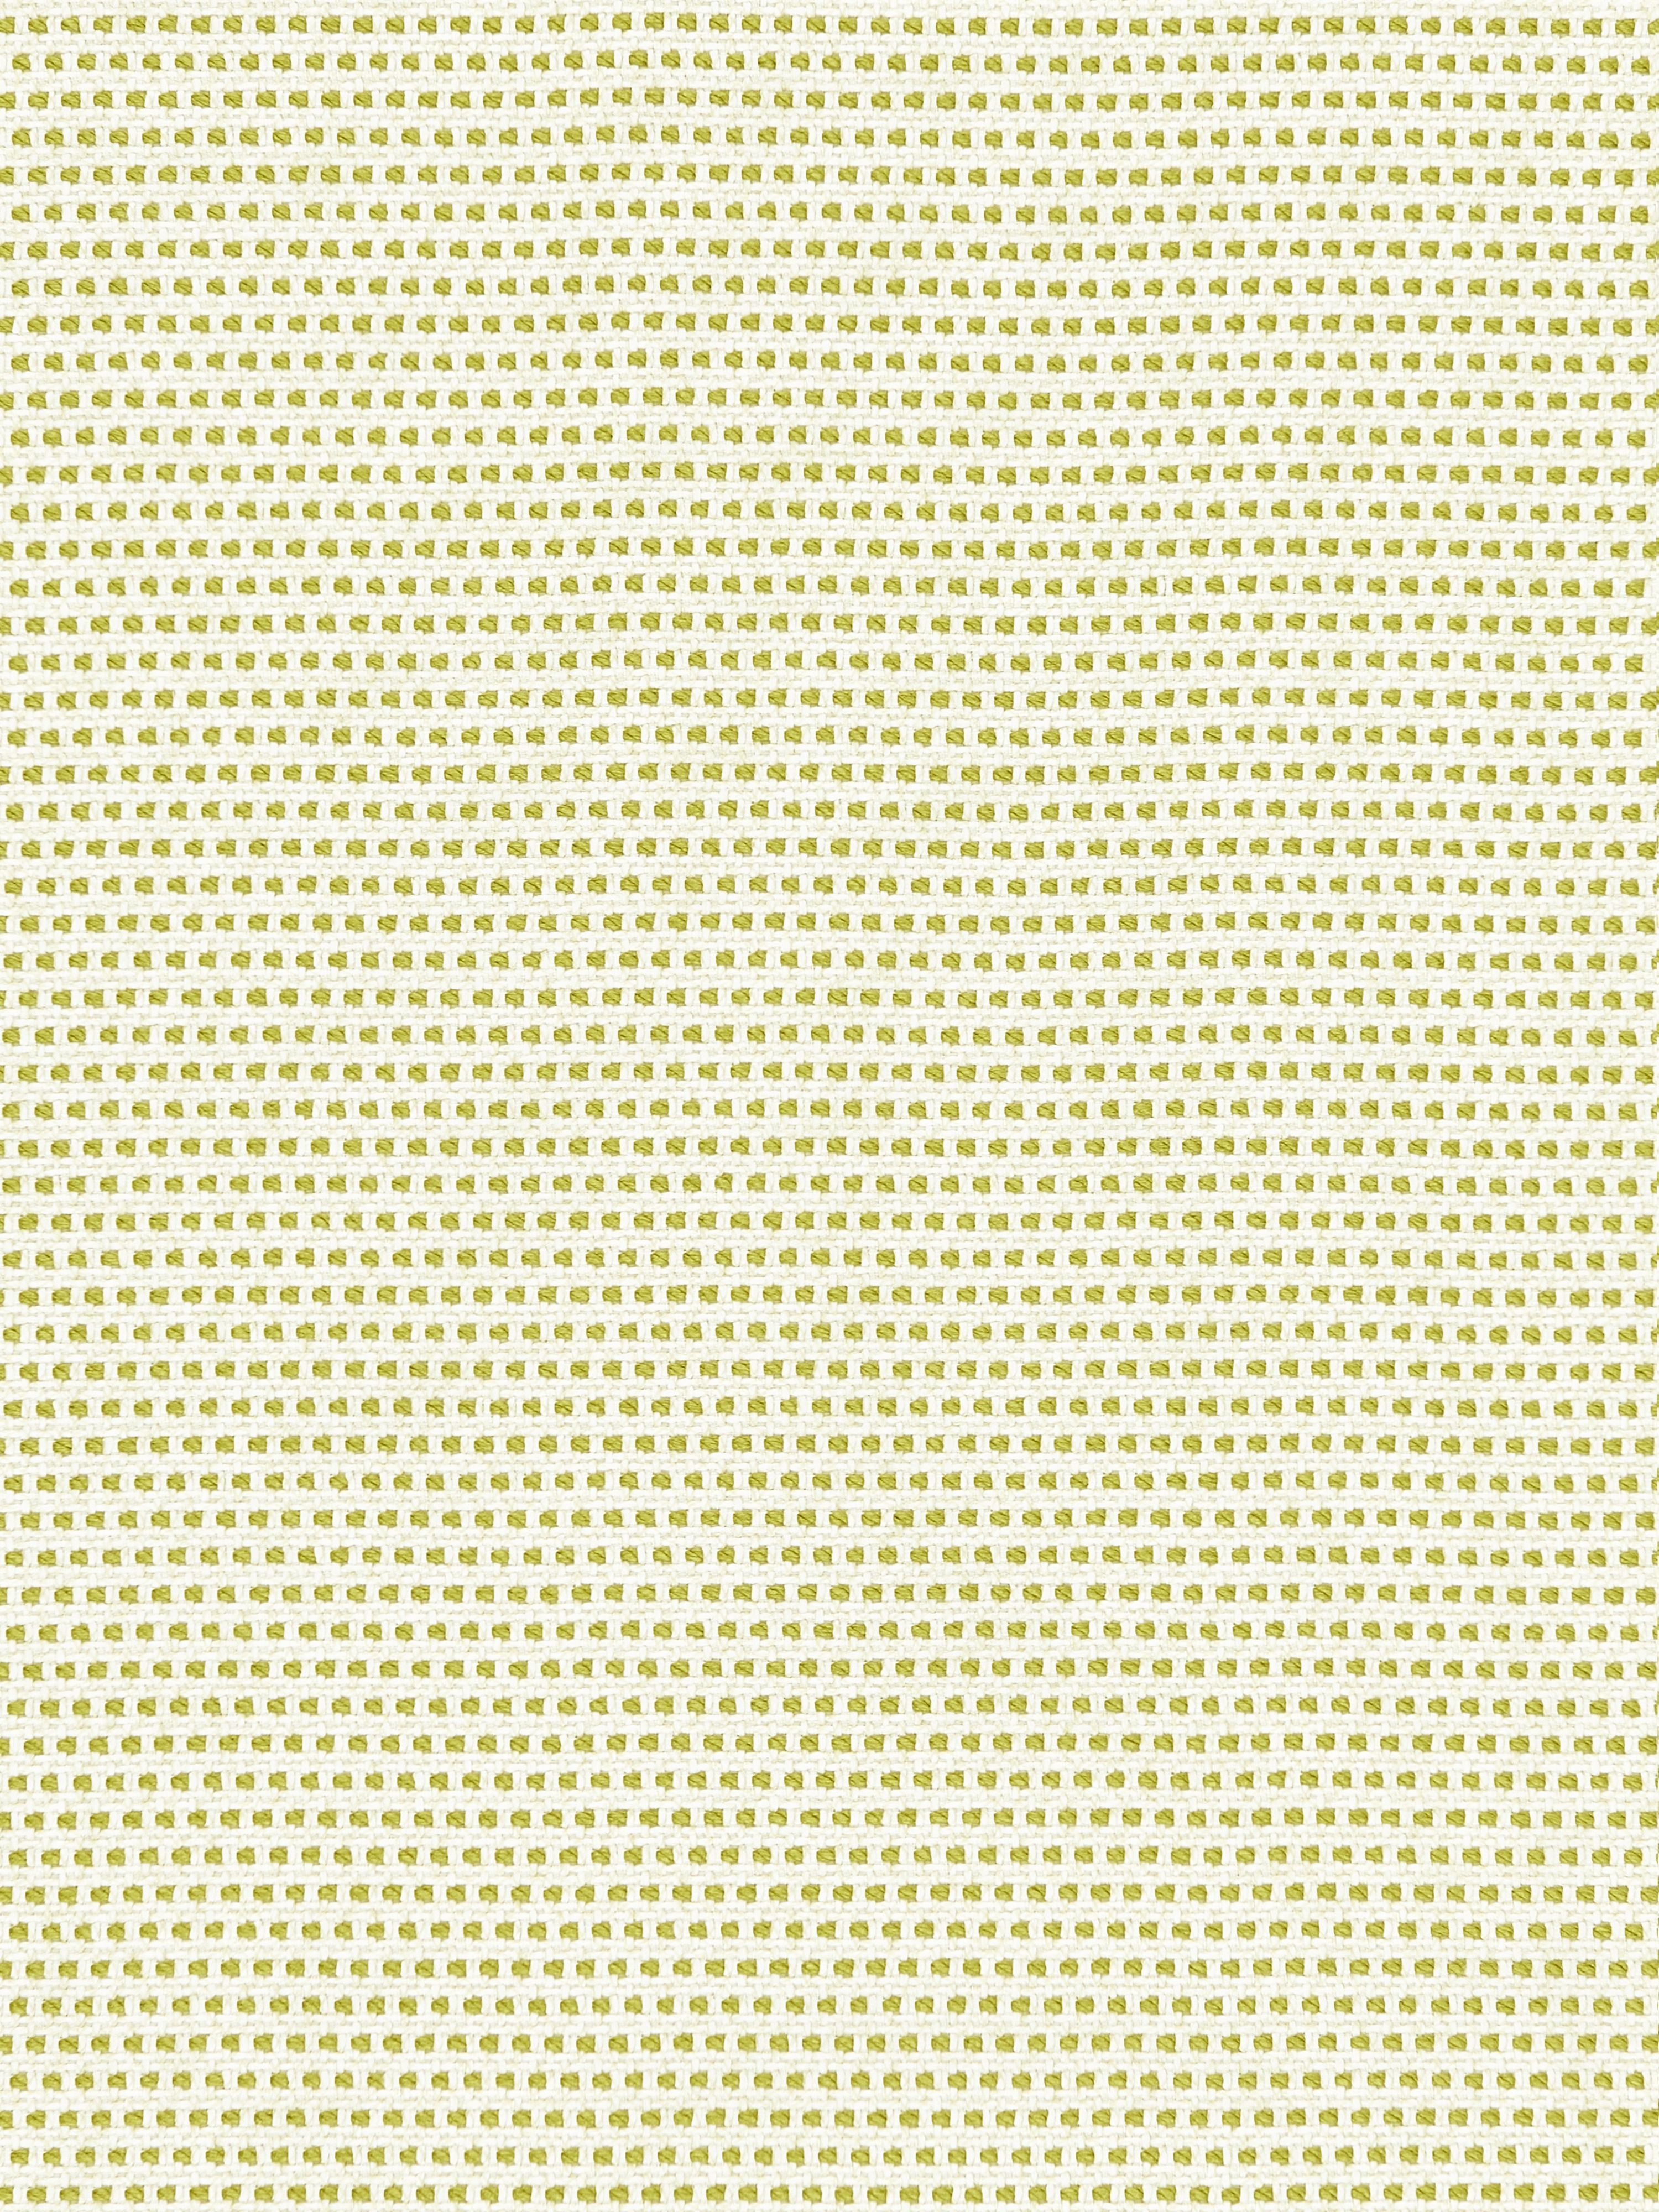 El Faro Beach fabric in citrine color - pattern number EA 00016037 - by Scalamandre in the Old World Weavers collection